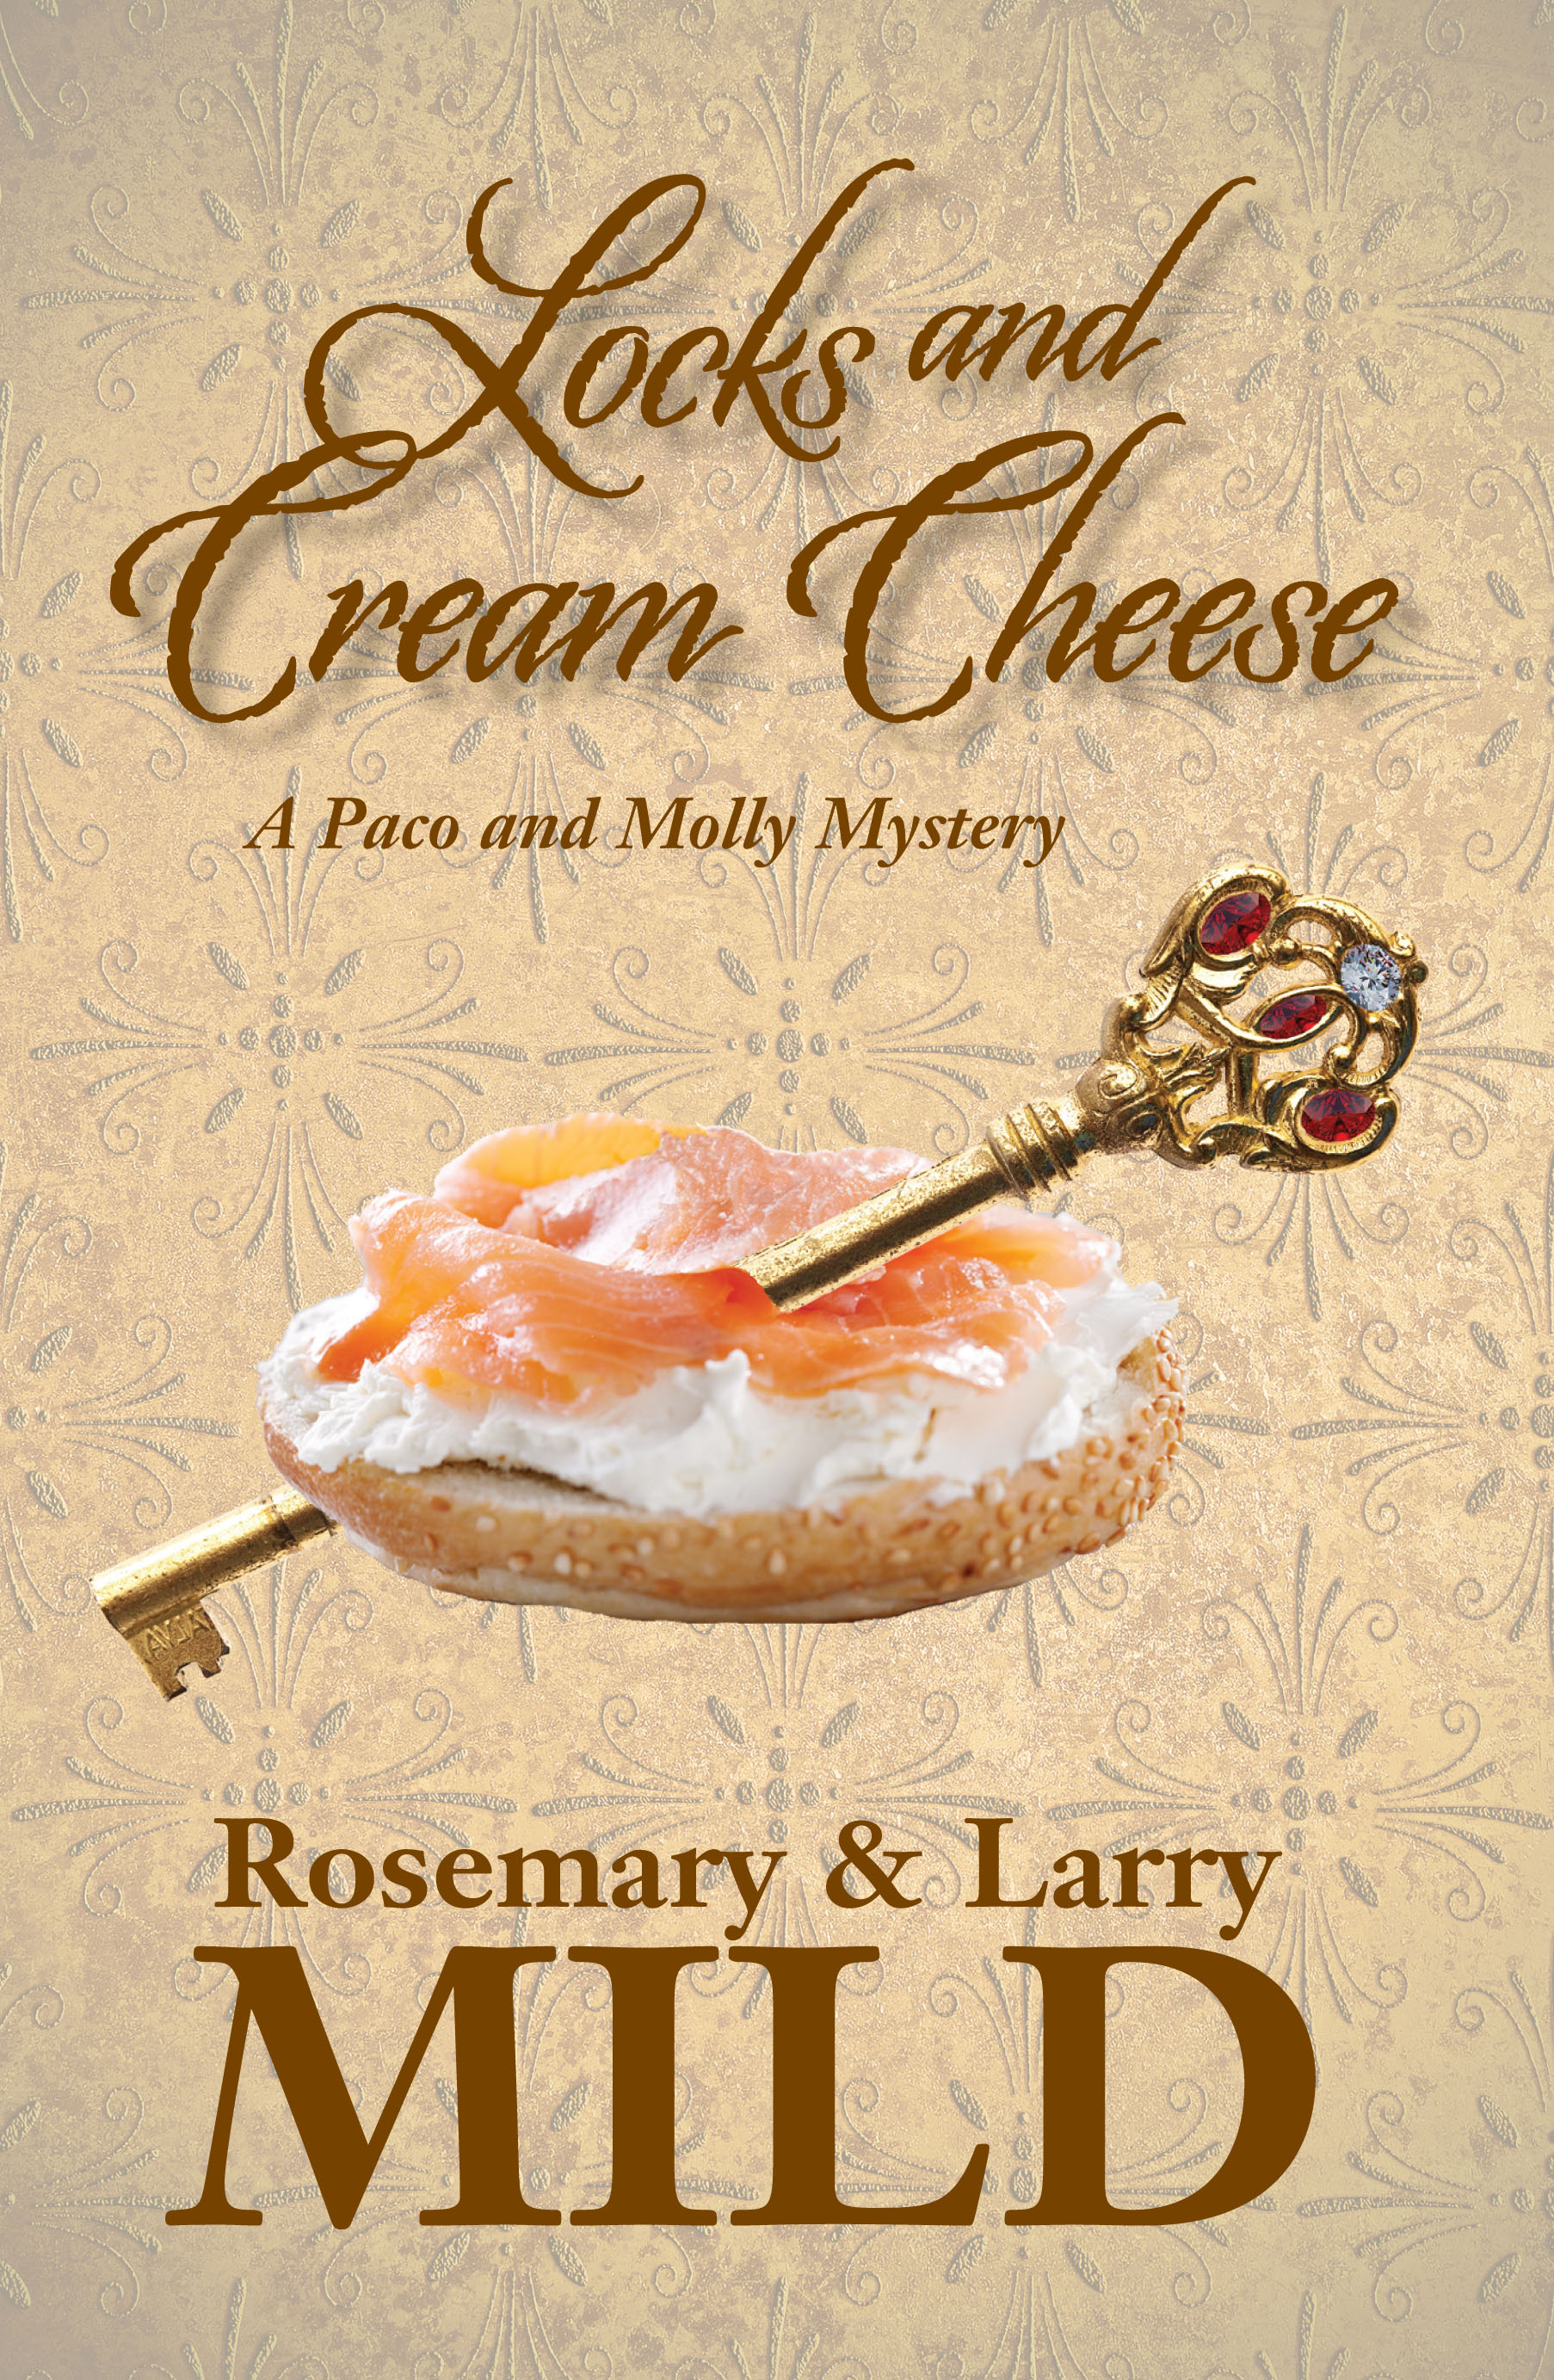 Locks and Cream Cheese by Rosemary and Larry Mild